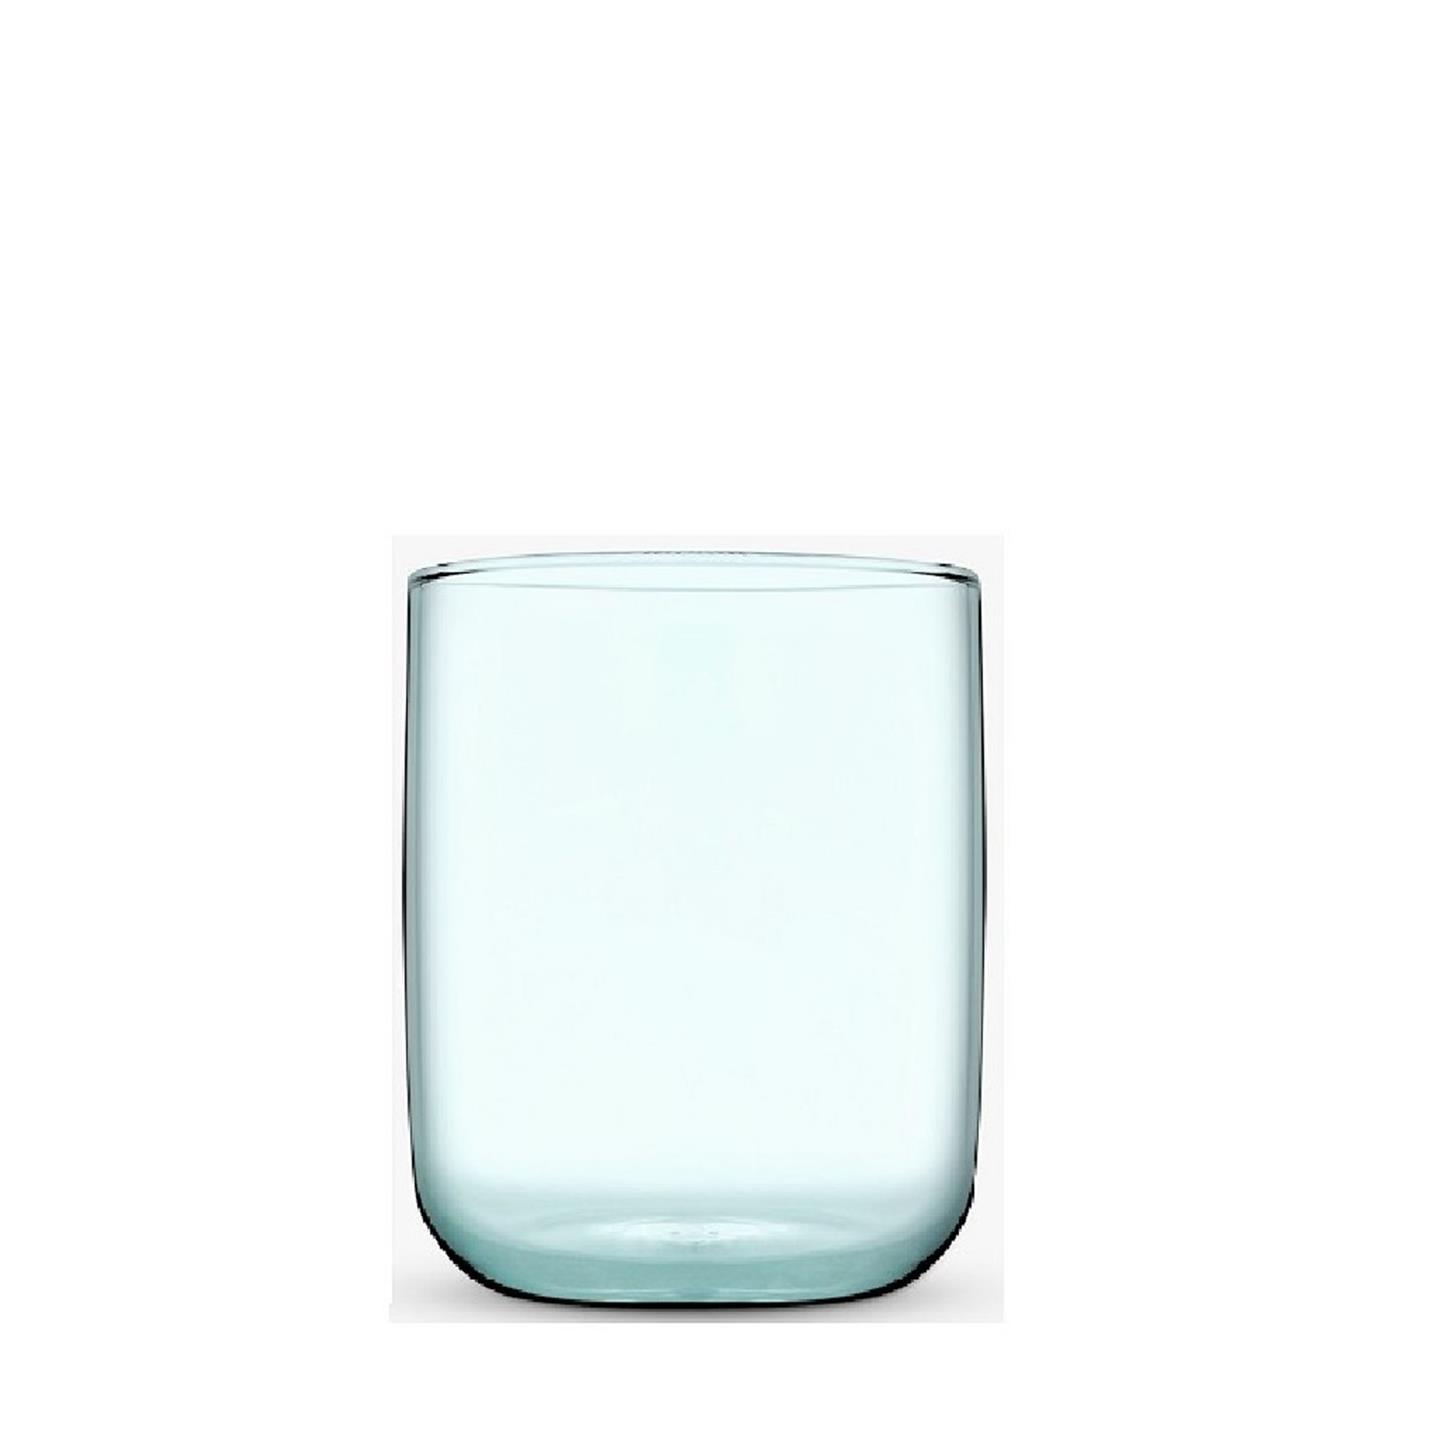 AWARE ICONIC WATER 280ML MADE OF REC. GLASS H:8,85 D:7CM P/1632 GB4.OB24